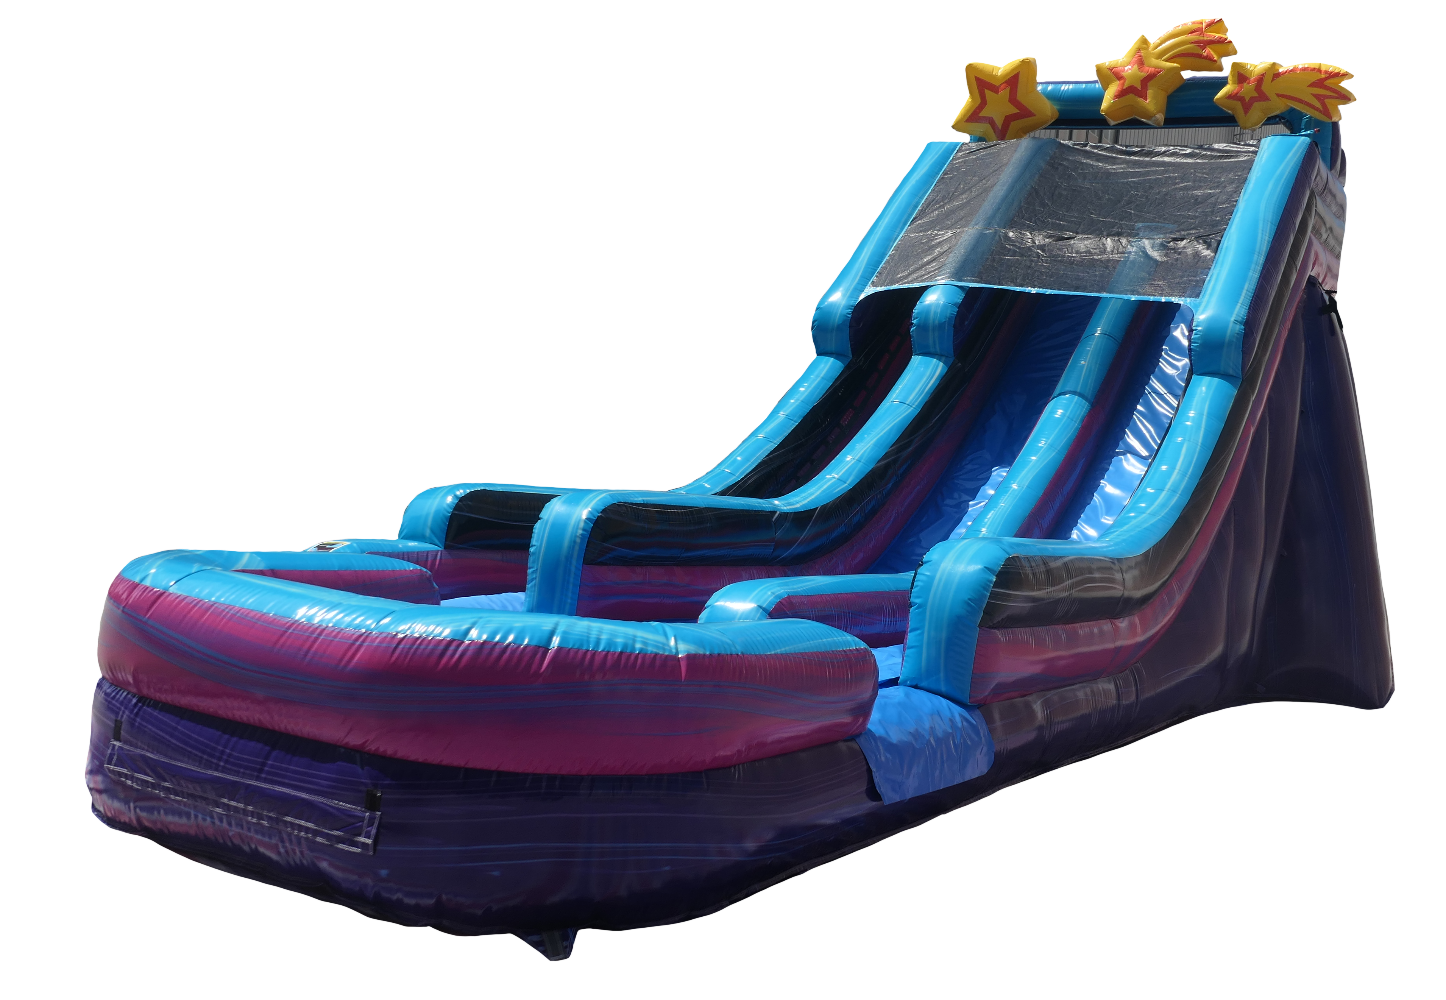 20 Galaxy Voyager Inflatable Dual Slide Wet or Dry